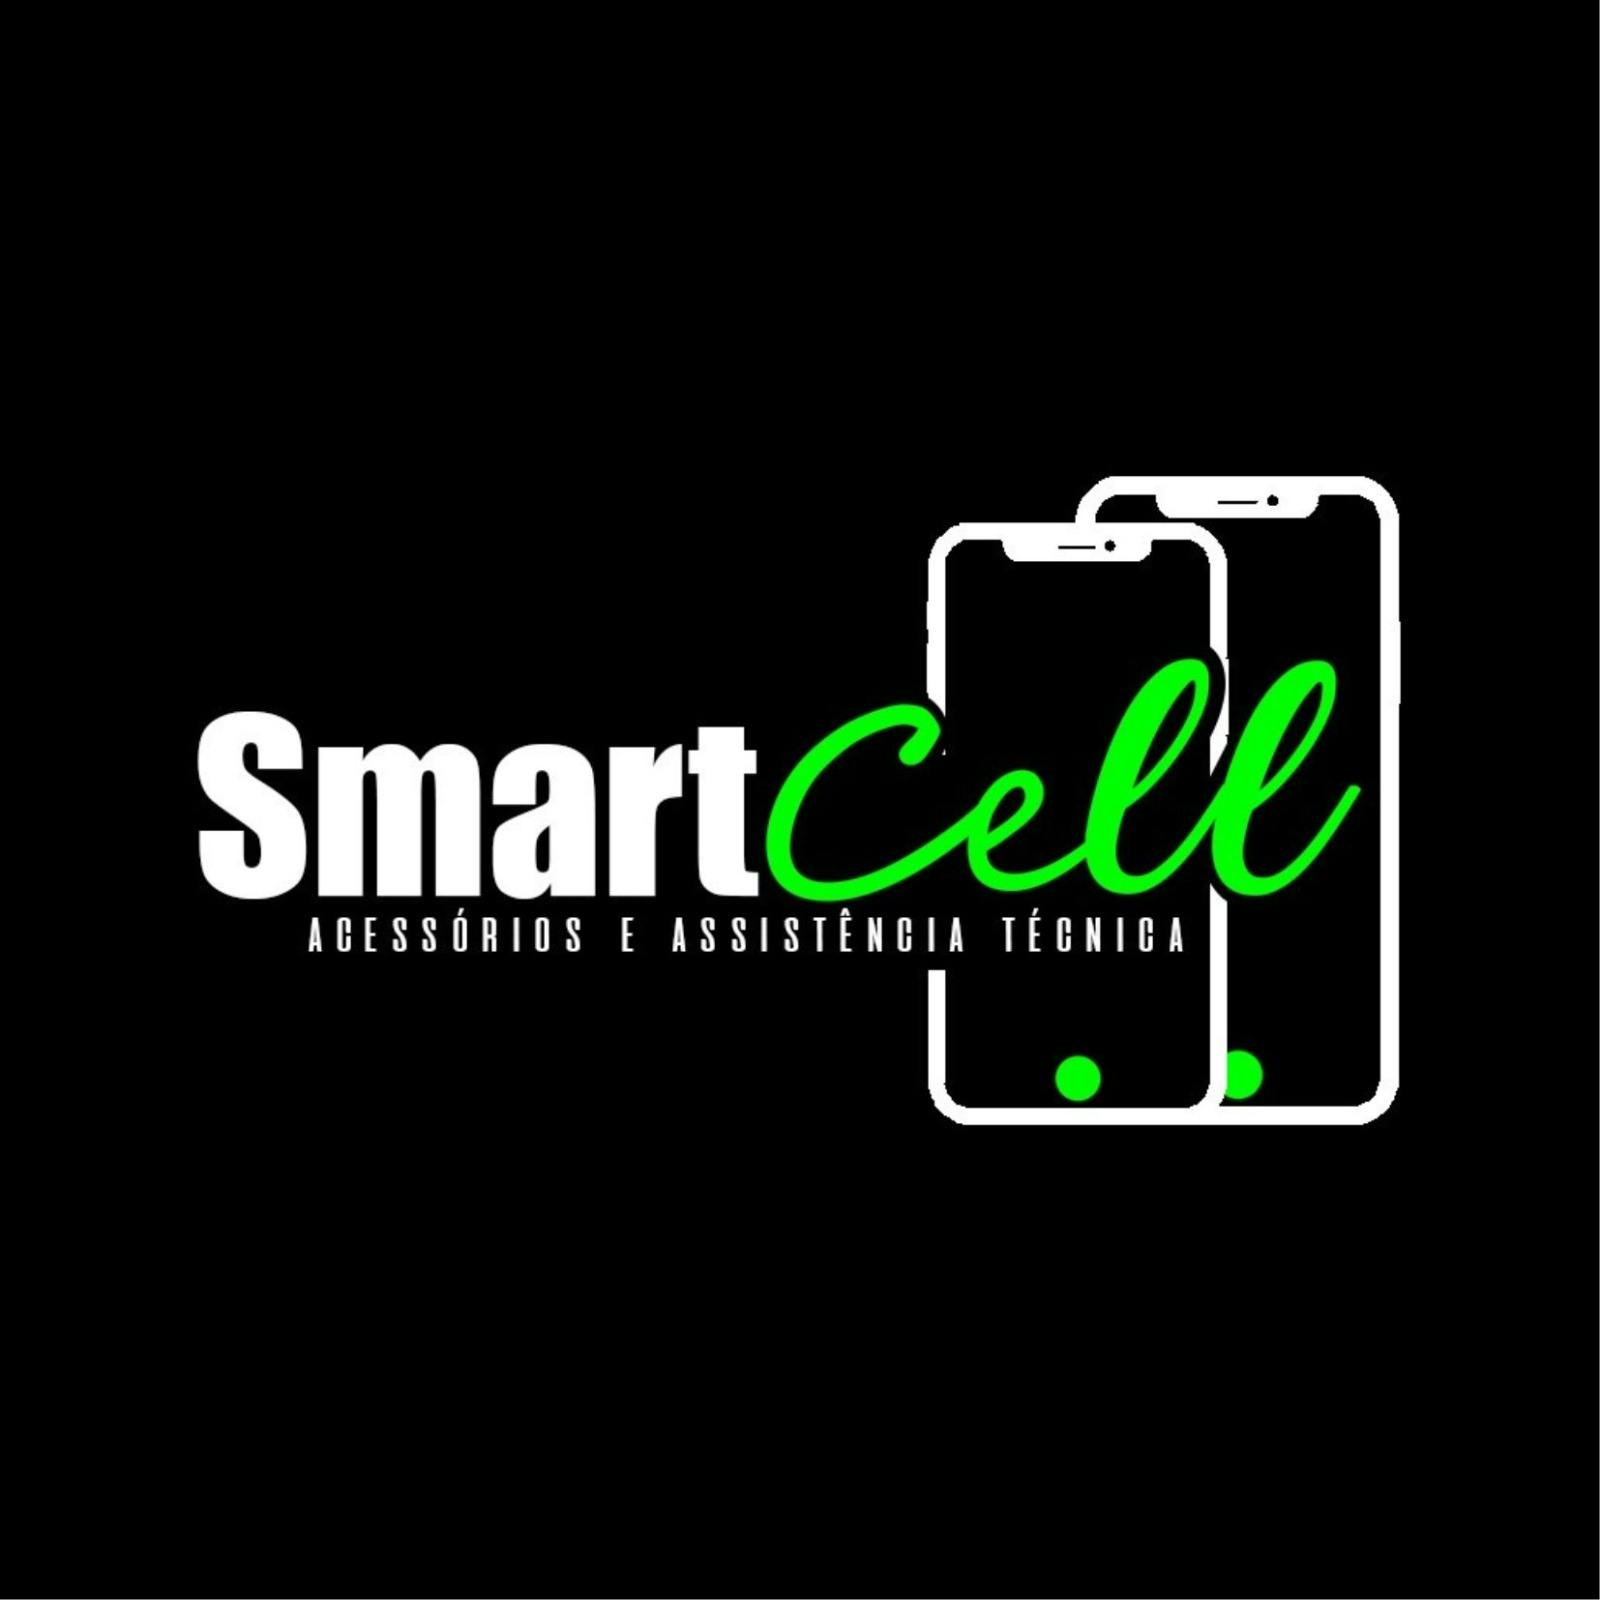 SMART CELL